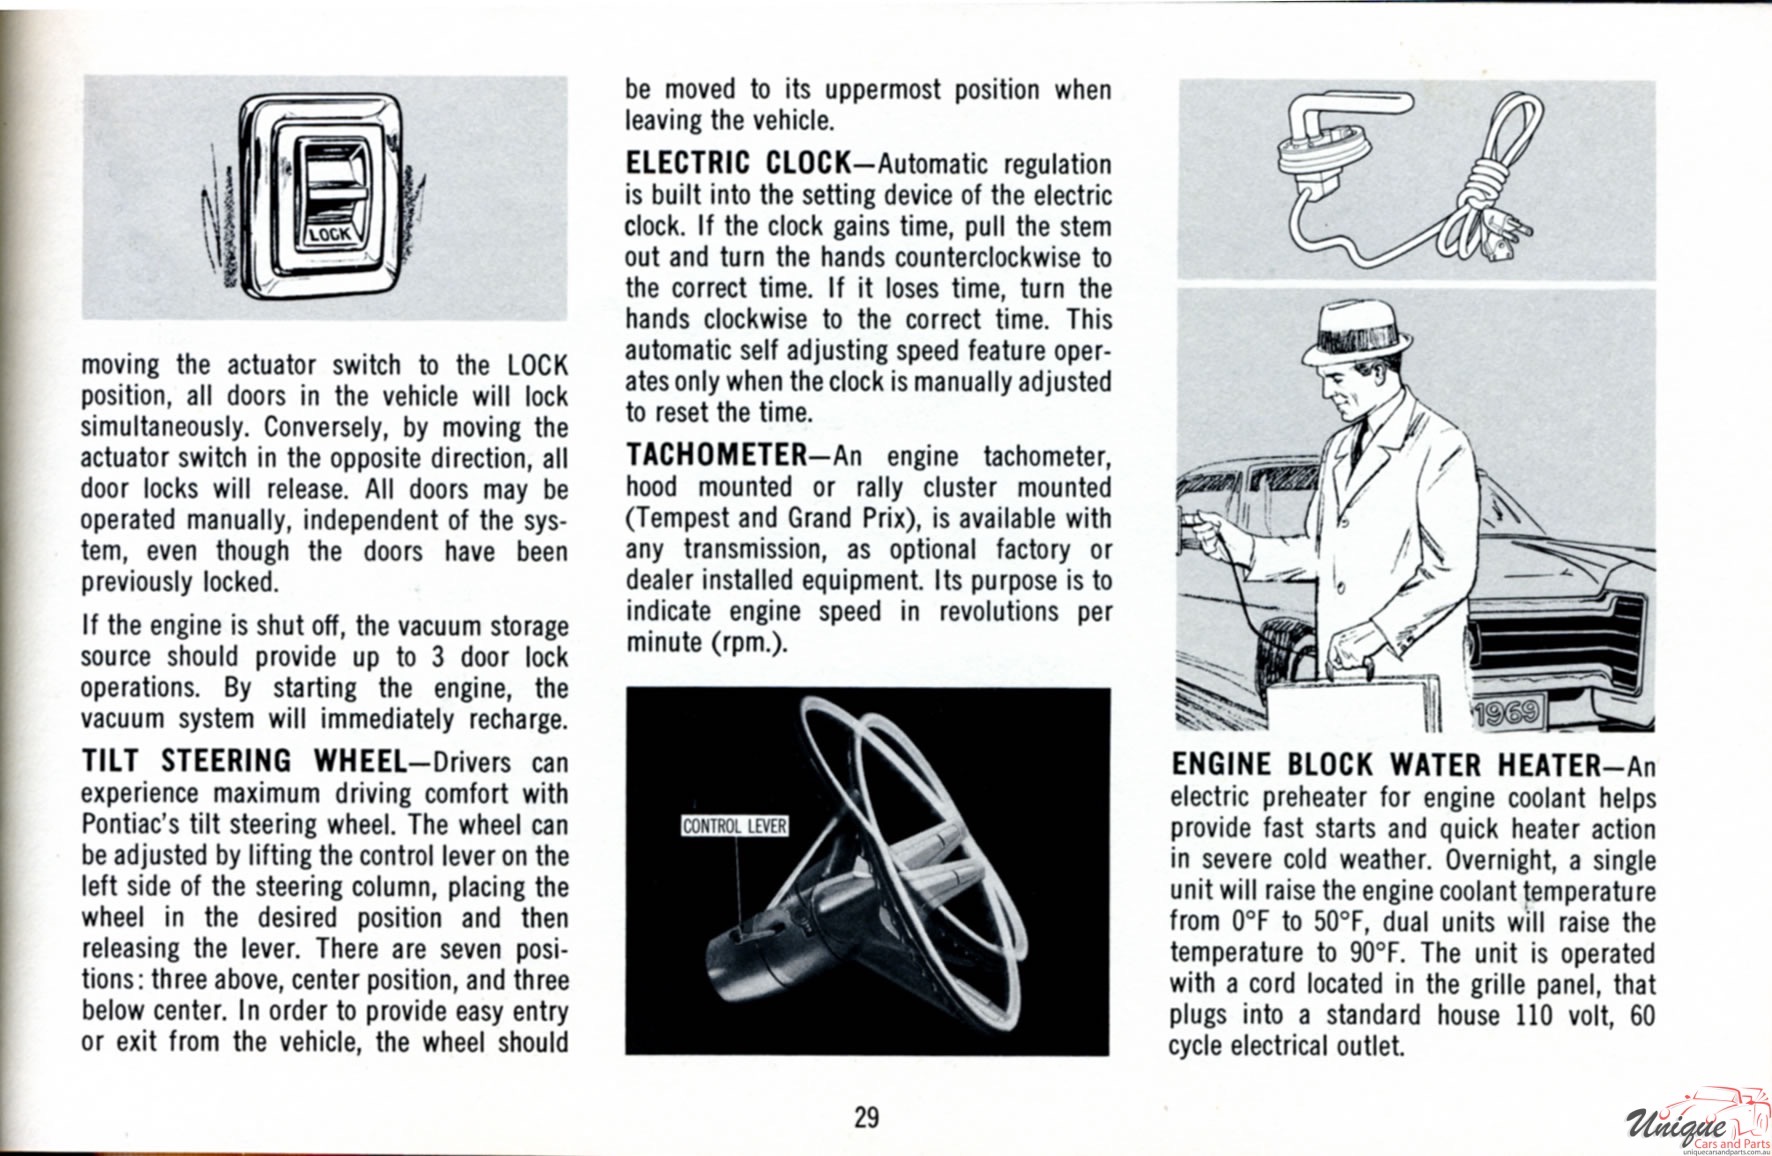 1969 Pontiac Owners Manual Page 19